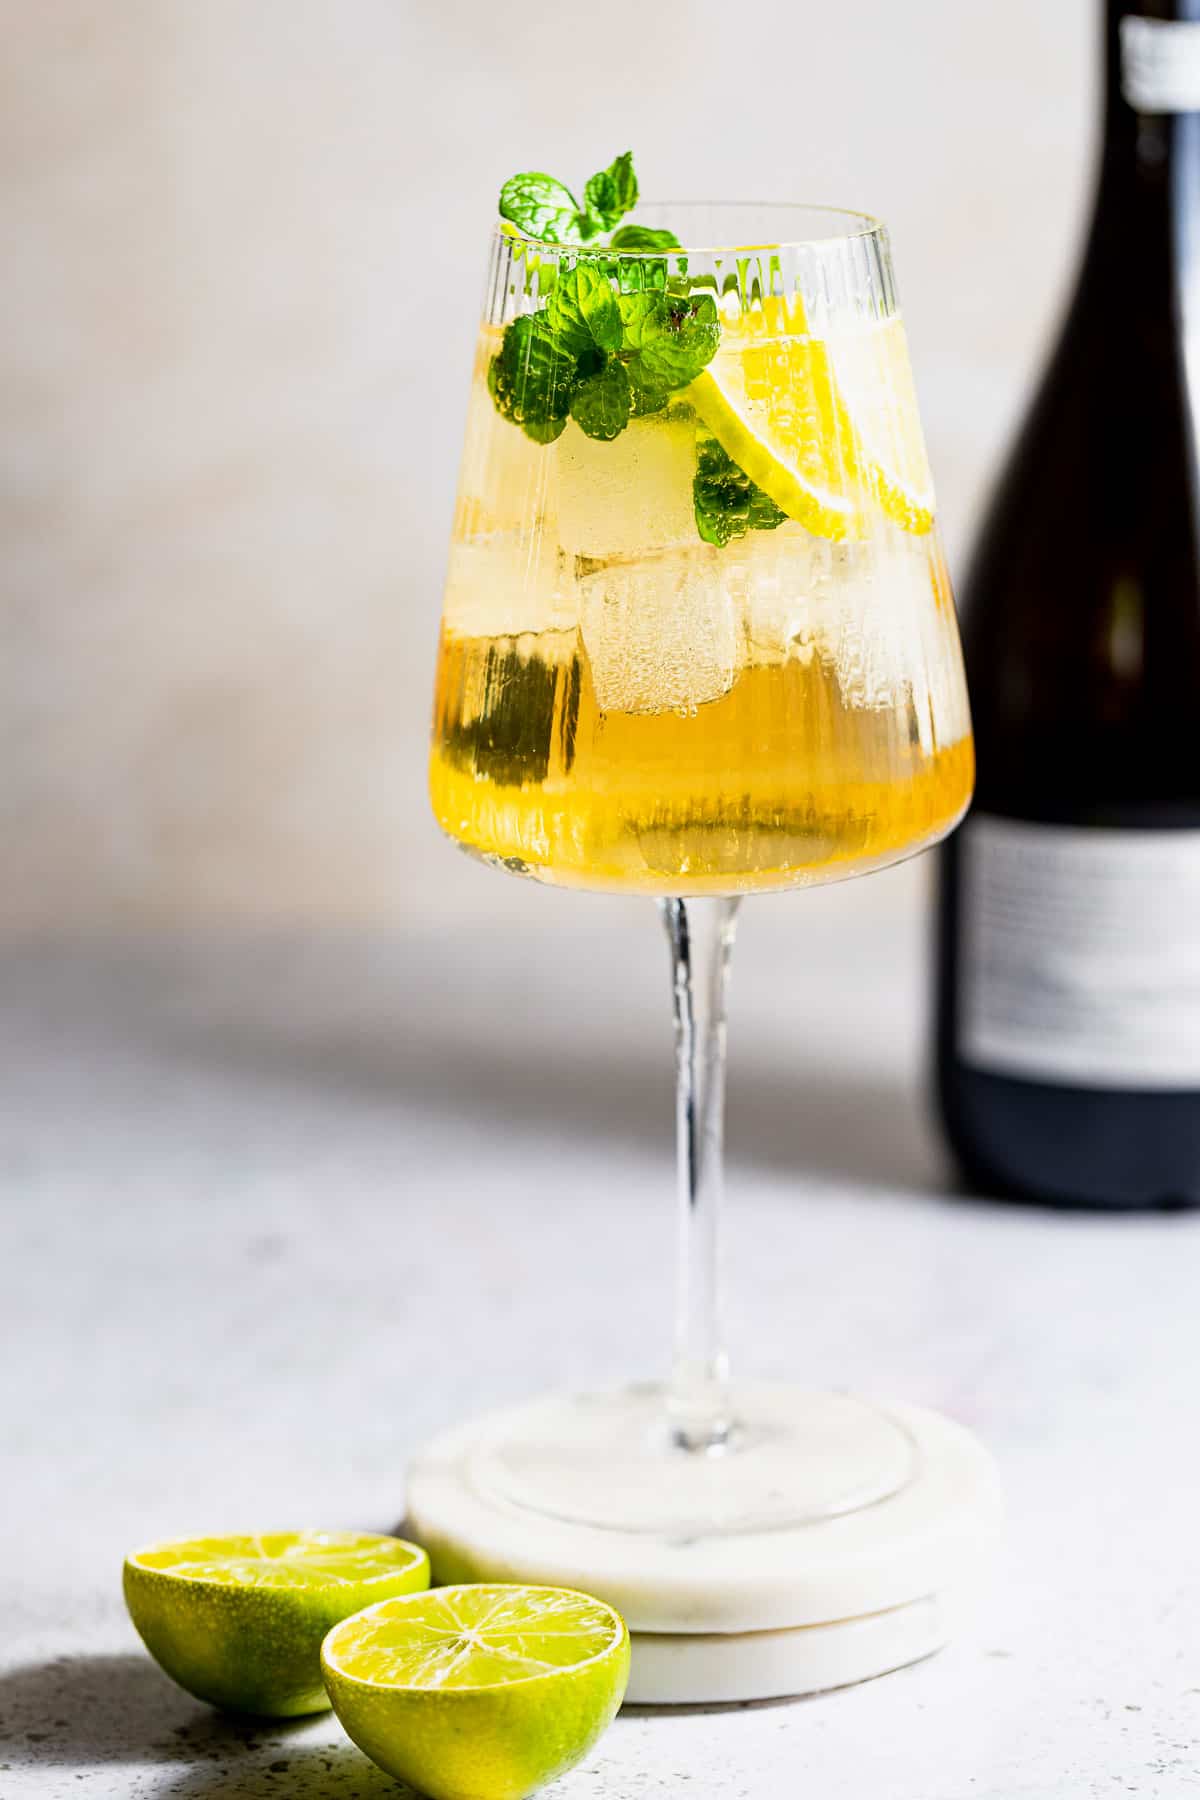 A Hugo Spritz cocktail with ice, mint, and lemon slices and a bottle of prosecco in the background.